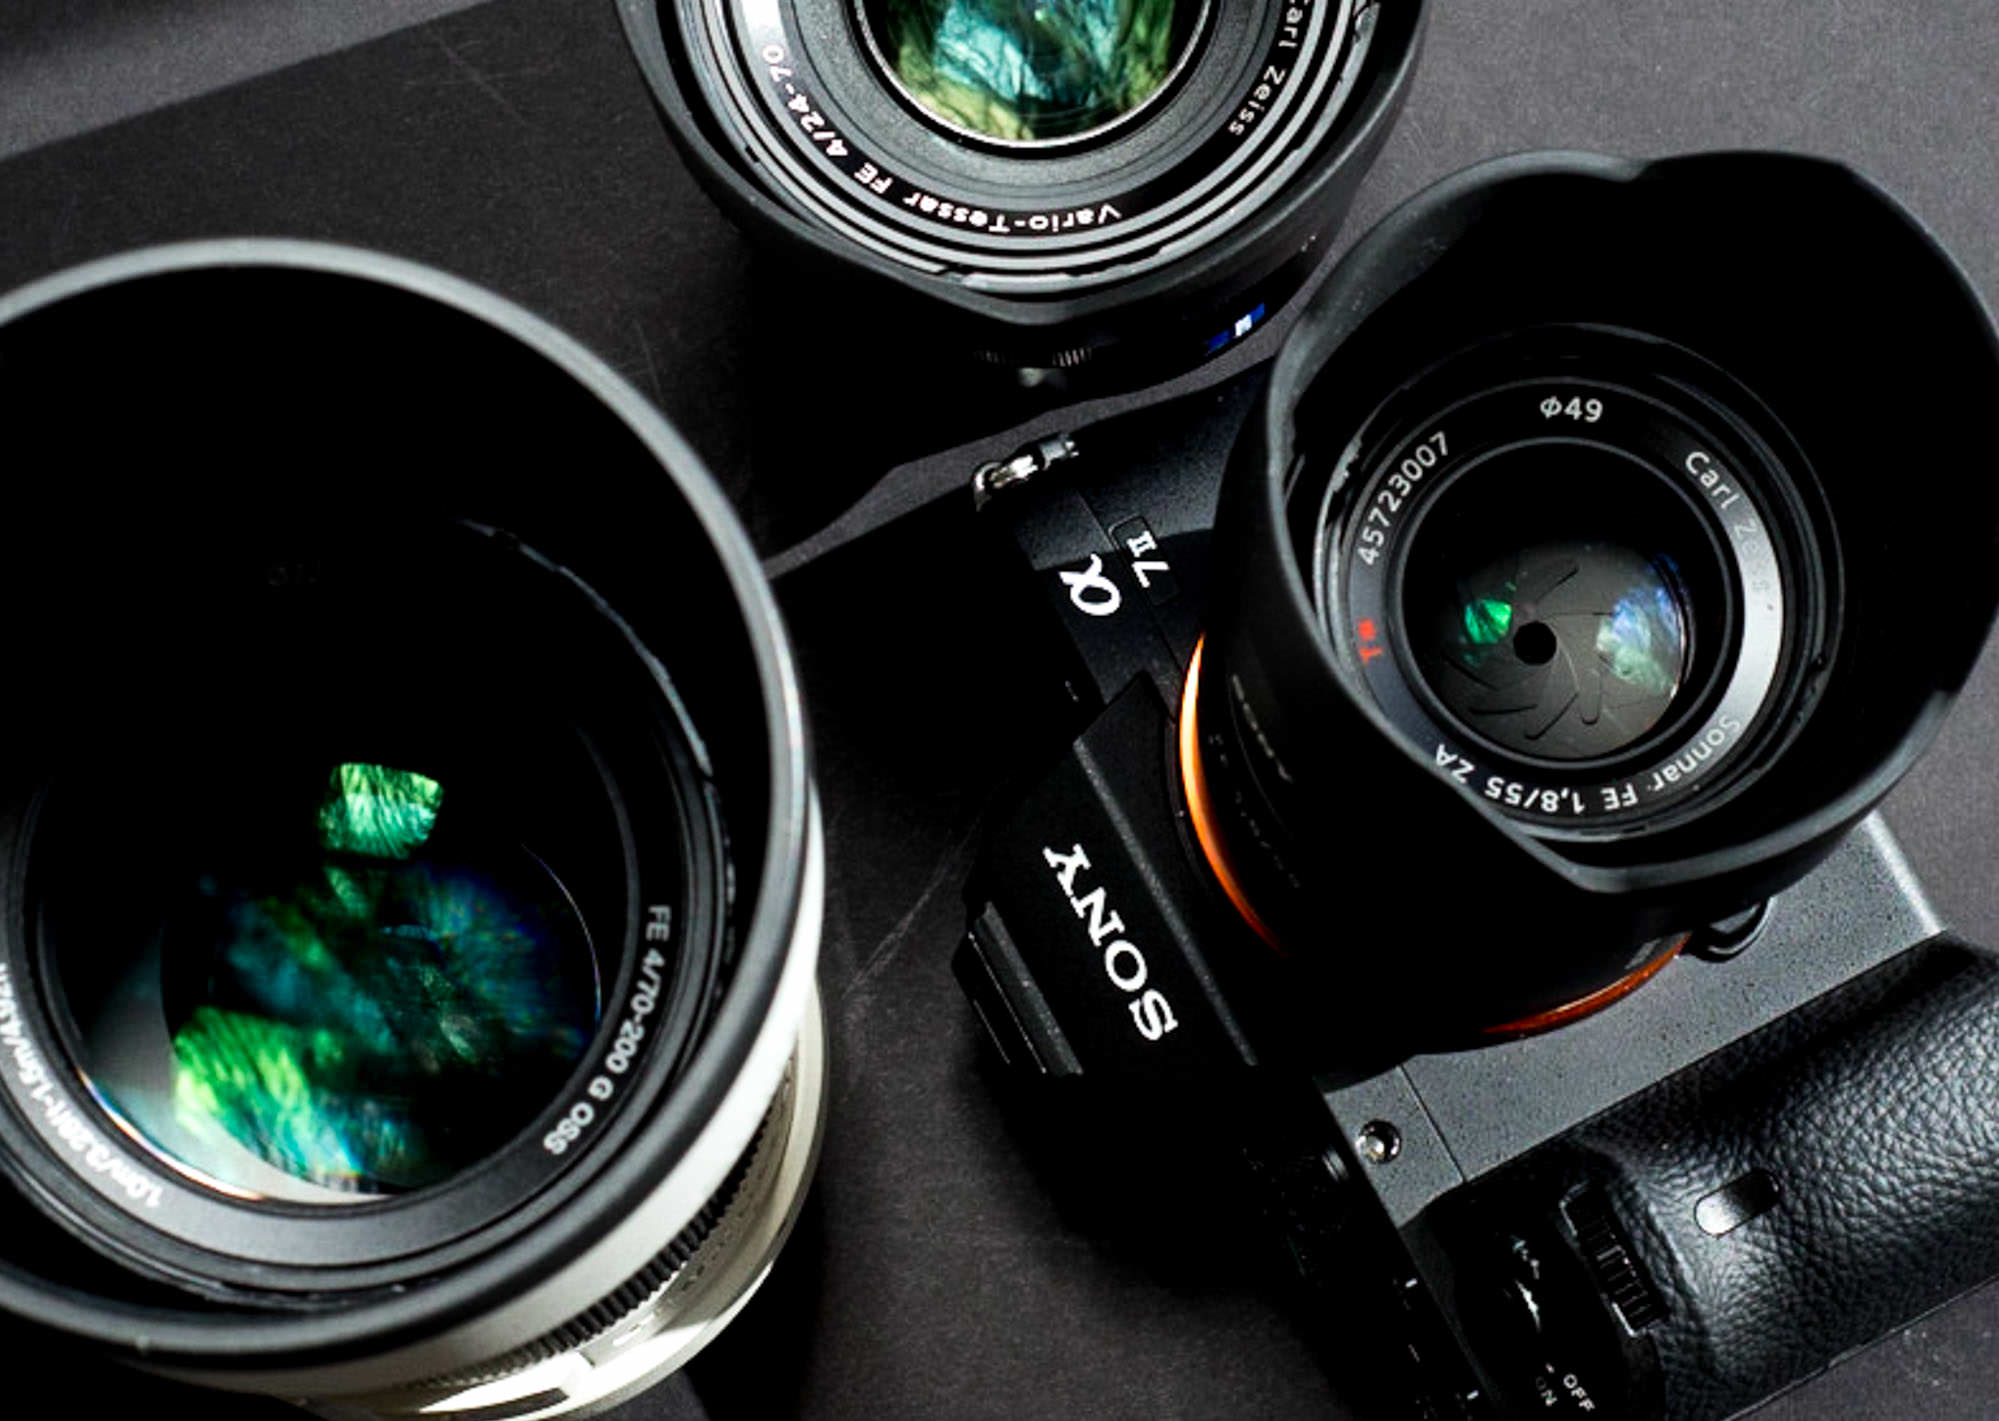 Sony A7 Series, Landscape Lens For Sony A7ii